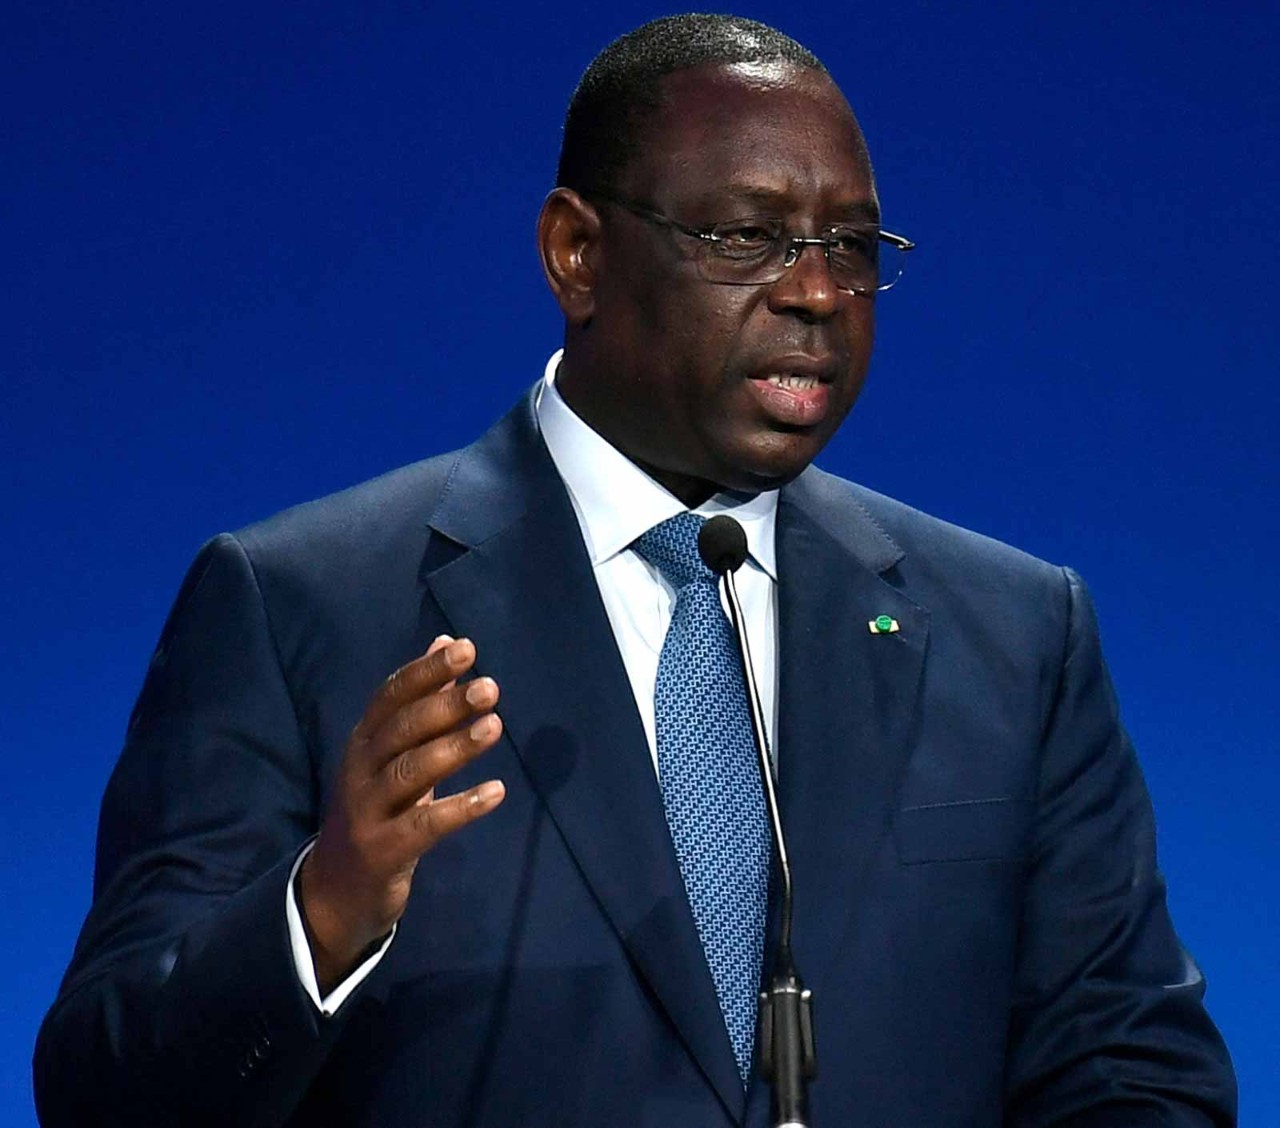 Senegal's President Macky Sall has called for a better deal for Africa